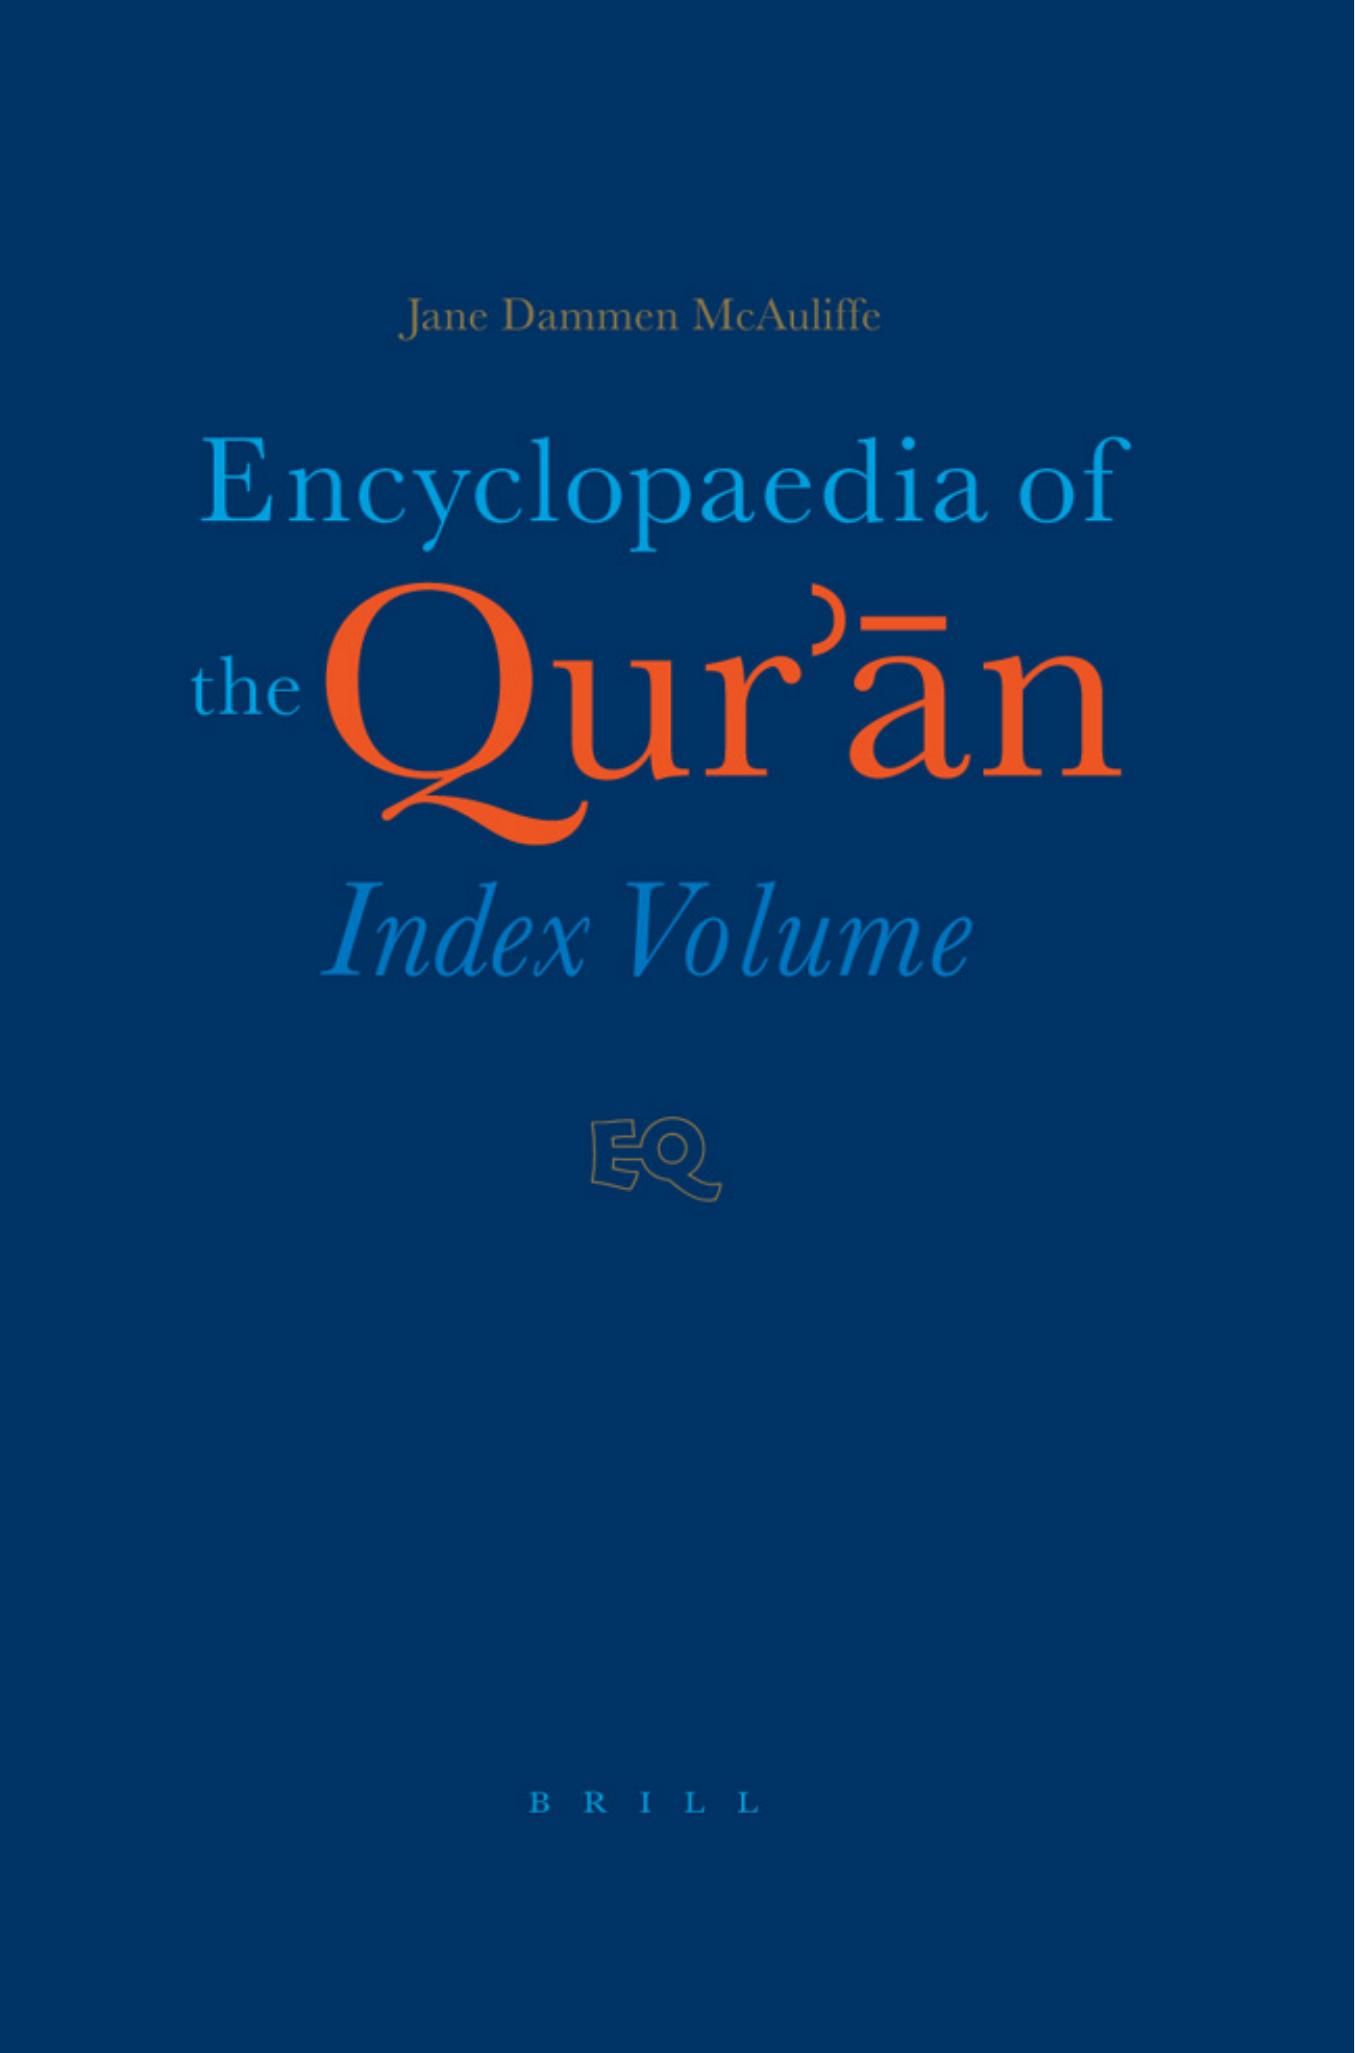 The Encyclopaedia of the Qur'An